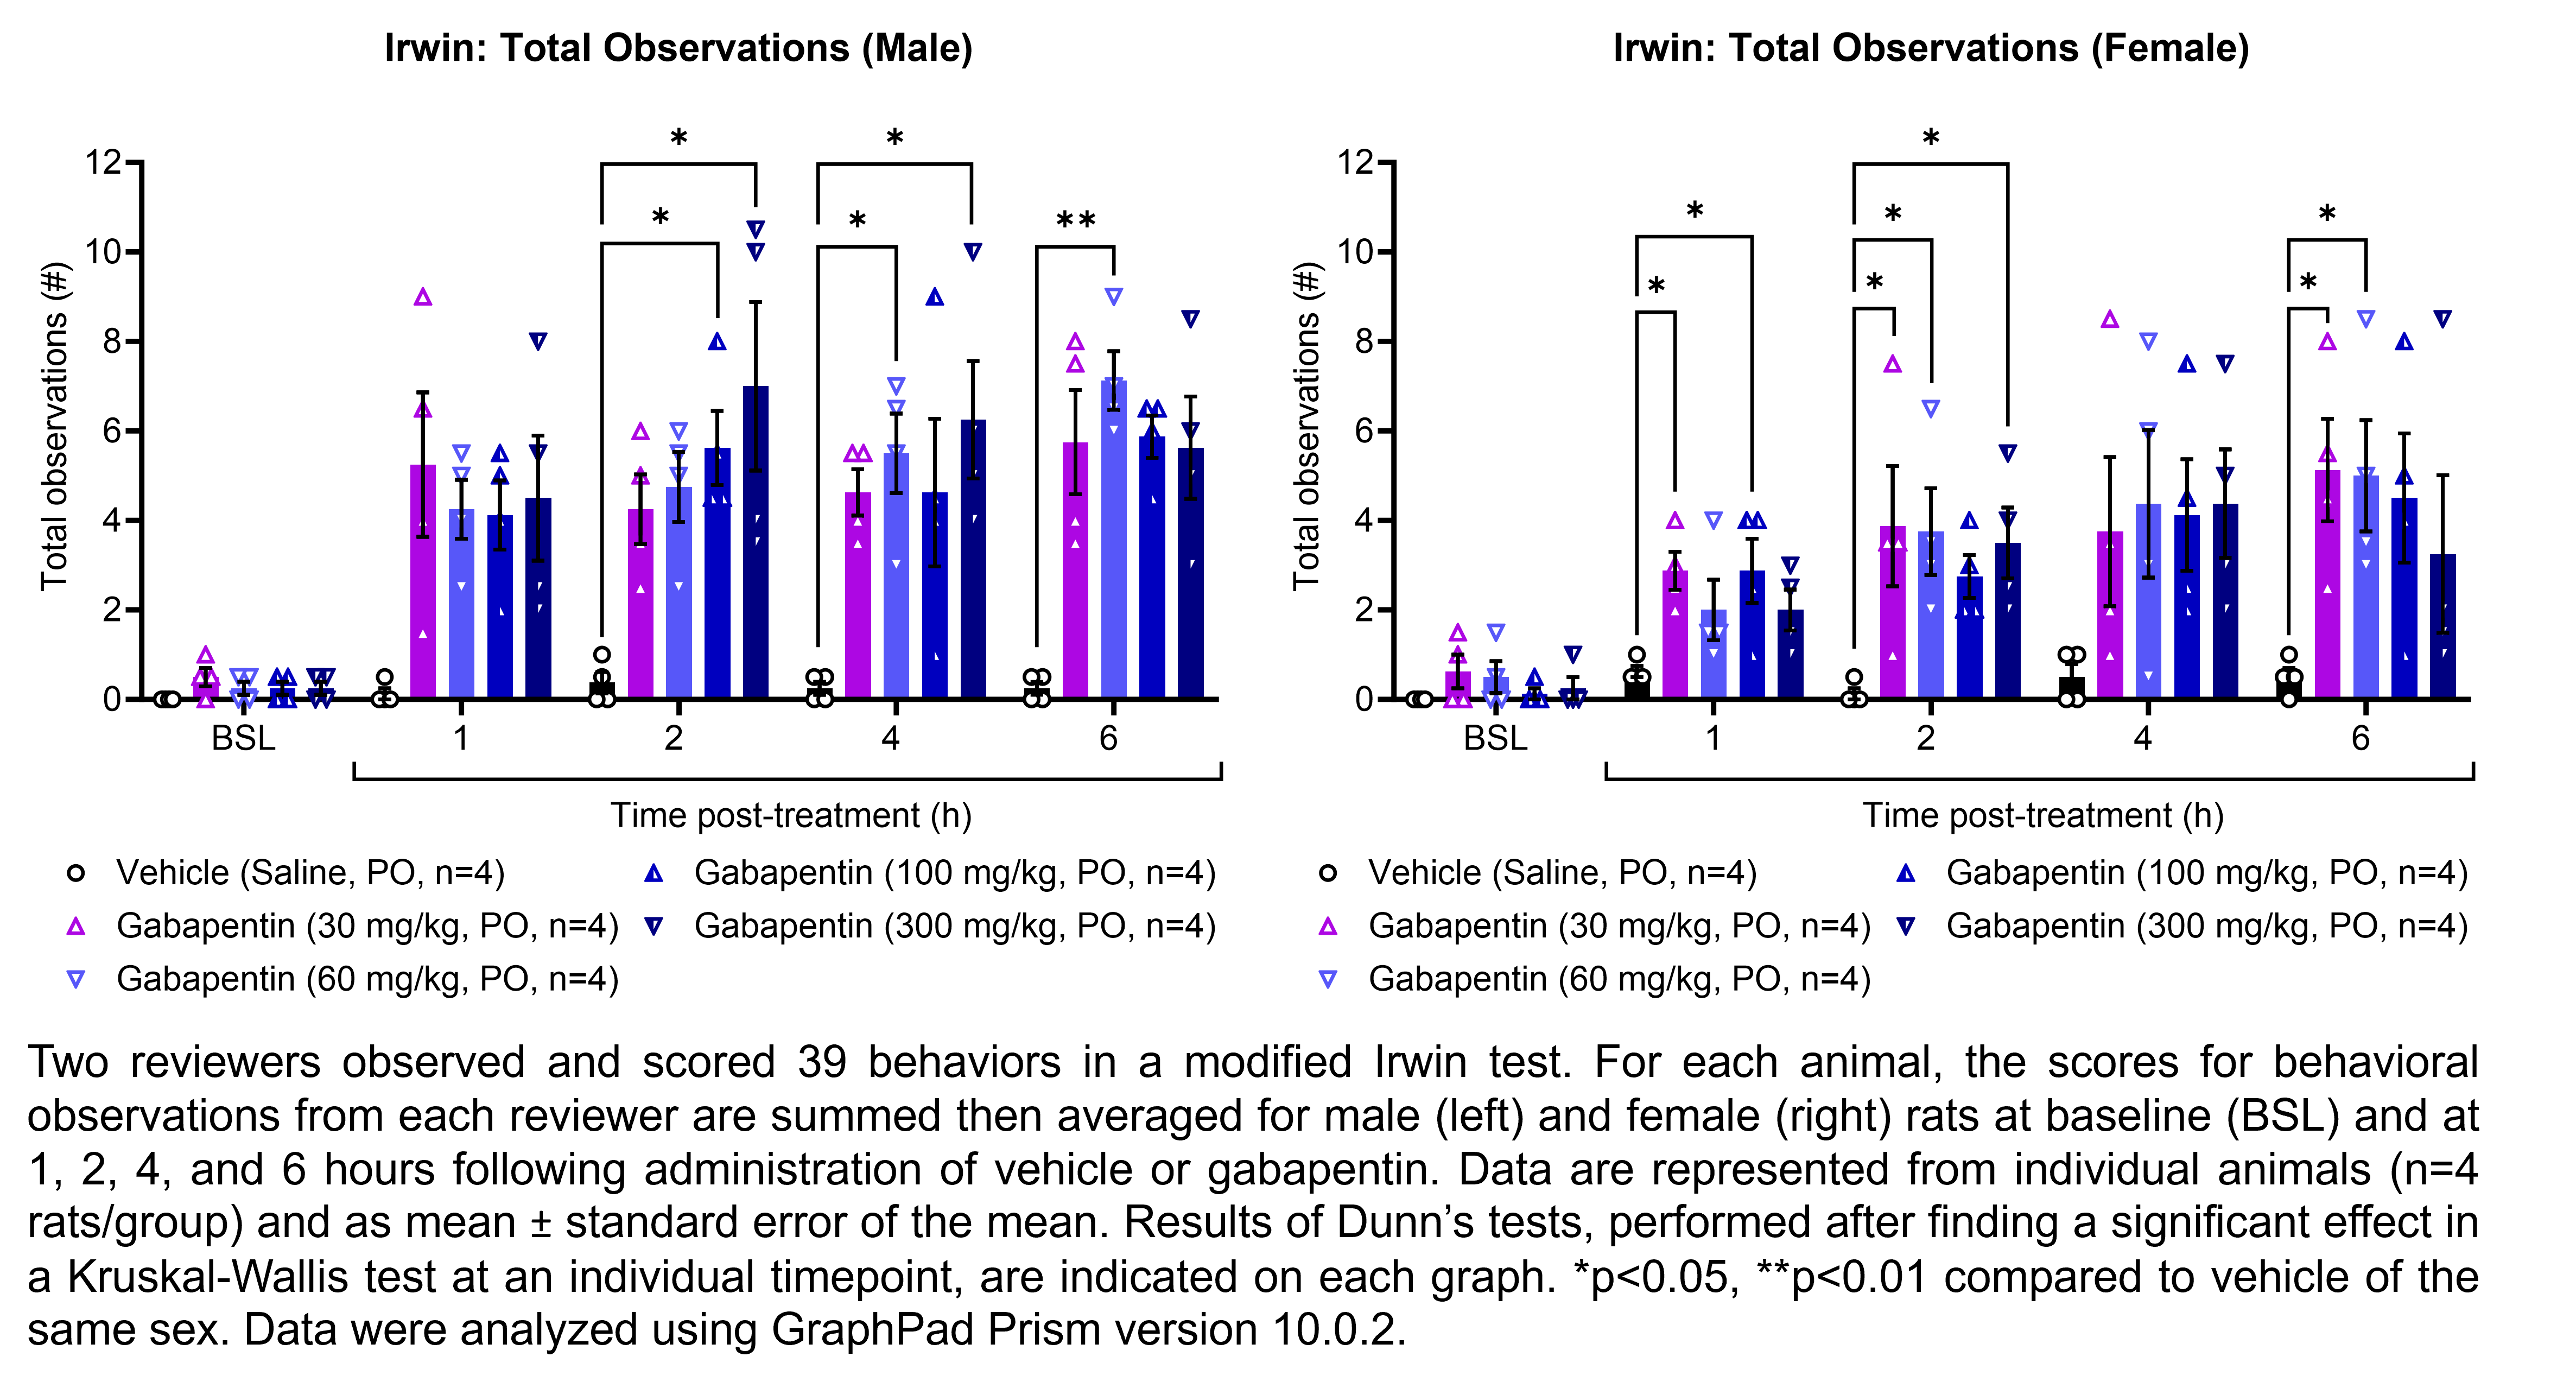 Two reviewers observed and scored 39 behaviors in a modified Irwin test. For each animal, the scores for behavioral observations from each reviewer are summed then averaged for male and female rats (shown on two graphs). Responses are shown at the following time points: baseline (before treatment) and at 1, 2, 4, and 6 hours after treatment with vehicle (saline, delivered PO) or gabapentin (30, 60, 100, or 300 mg/kg, delivered PO). There were 4 rats per group. Kruskal-Wallis tests were performed at each timepoint for each sex, followed by Dunn’s tests when a significant effect was observed. Dunn’s tests found an increase in the number of observations relative to vehicle in males at 2 hours post-treatment with 100 mg/kg gabapentin (p<0.05) and 300 mg/kg gabapentin (p<0.05), at 4 hours post-treatment with 60 mg/kg gabapentin (p<0.05) and 300 mg/kg gabapentin (p<0.05), and at 6 hours post-treatment with 60 mg/kg gabapentin (p<0.01). Dunn’s tests found an increase in the number of observations relative to vehicle in females at 1 hour post-treatment with 30 mg/kg gabapentin (p<0.05) and 100 mg/kg gabapentin (p<0.05); at 4 hours post-treatment with 30 mg/kg gabapentin (p<0.05), 60 mg/kg gabapentin (p<0.05), and 300 mg/kg gabapentin (p<0.05); and at 6 hours post-treatment with 30 mg/kg gabapentin (p<0.05) and 60 mg/kg gabapentin (p<0.05). Data were analyzed using GraphPad Prism version 10.0.2